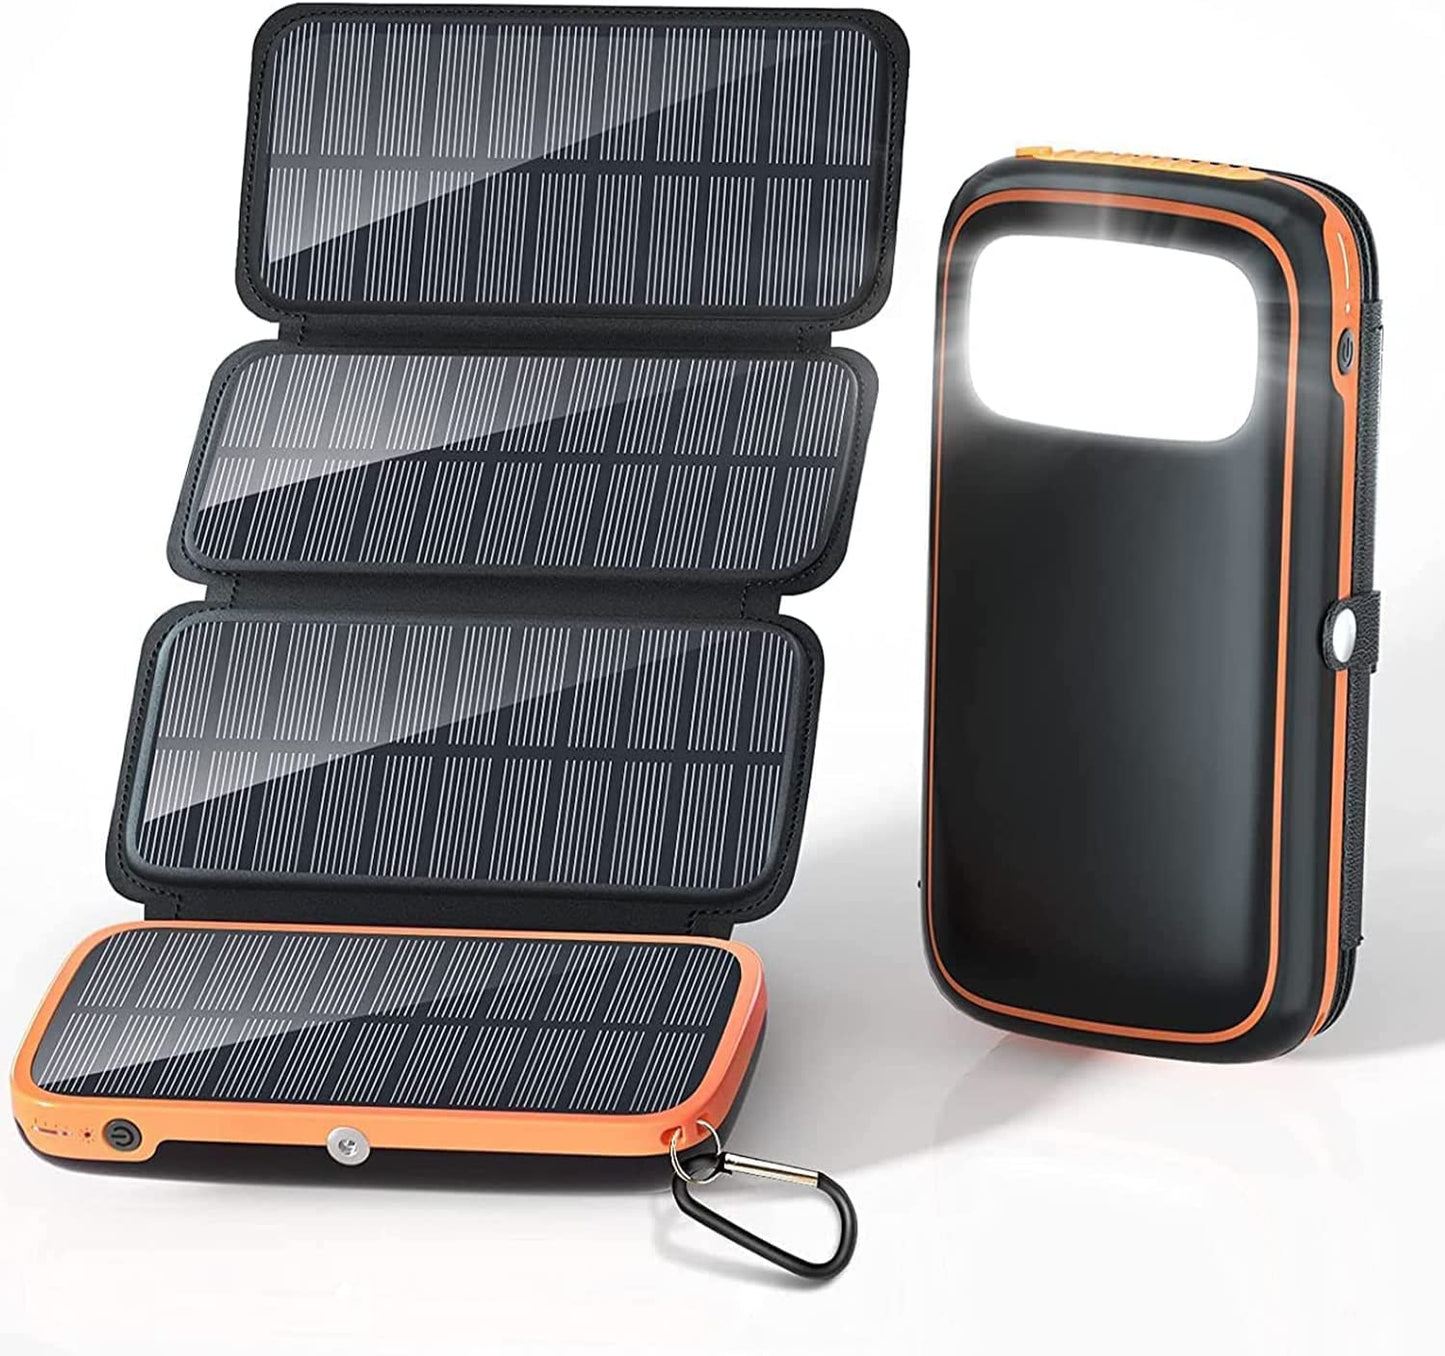 Solar Charger Power Bank 27000mAh with 4 Solar Panels